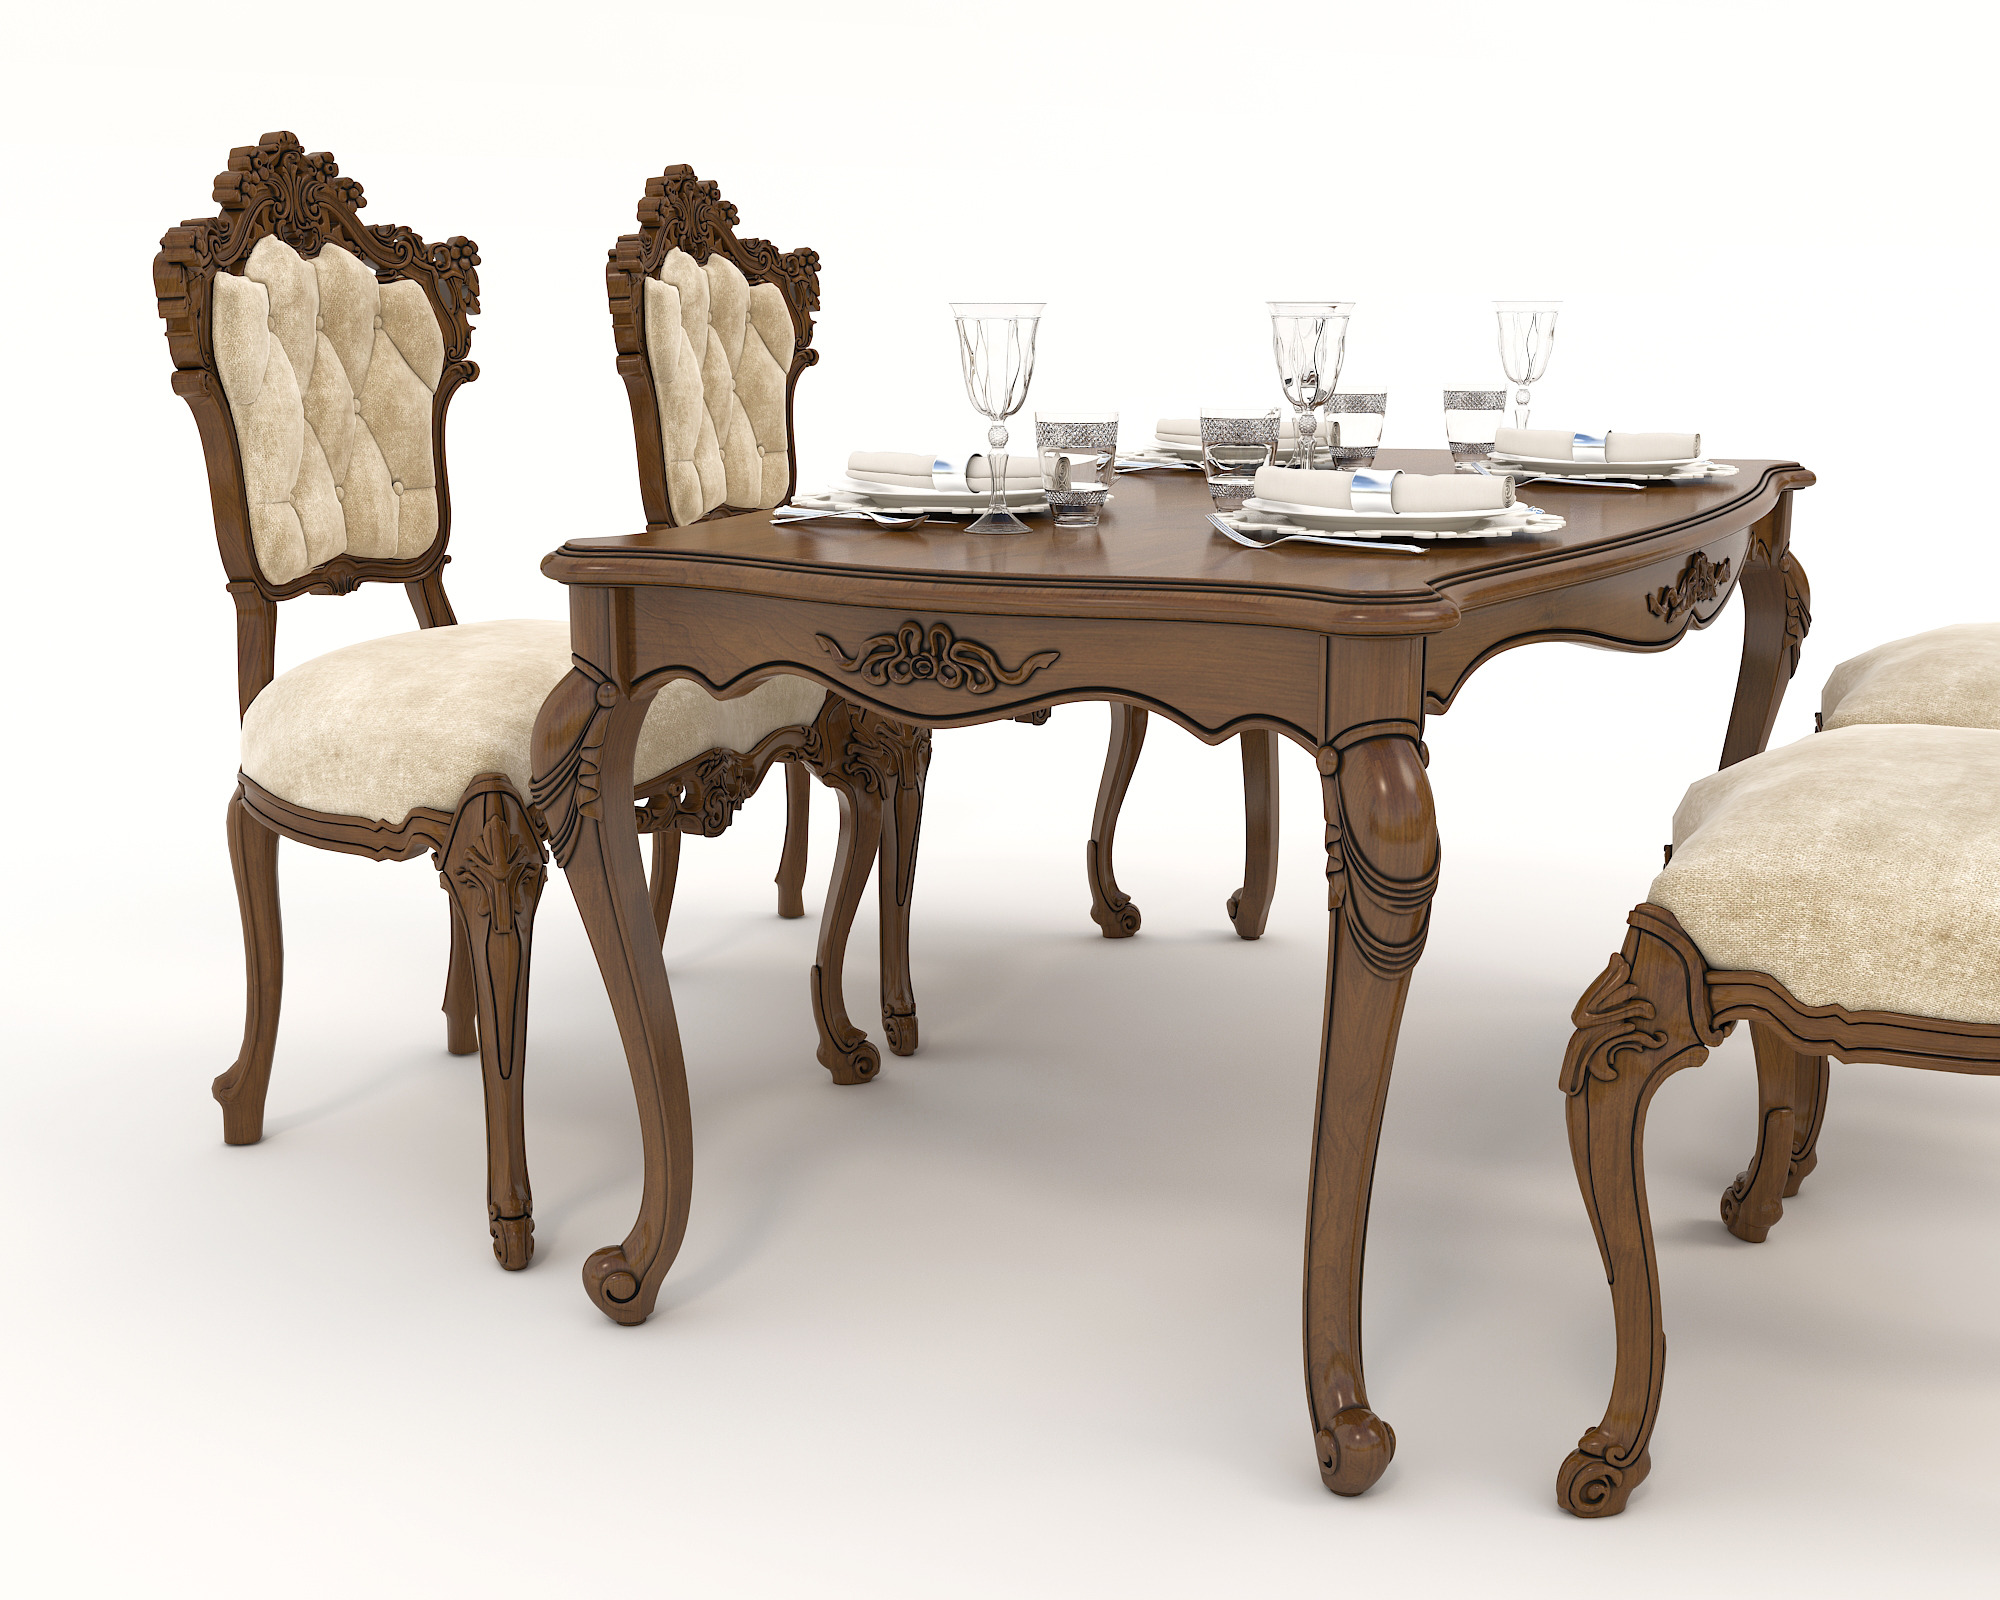 Classic Dining Table and Chairs 21 by nhattuankts | 3DOcean